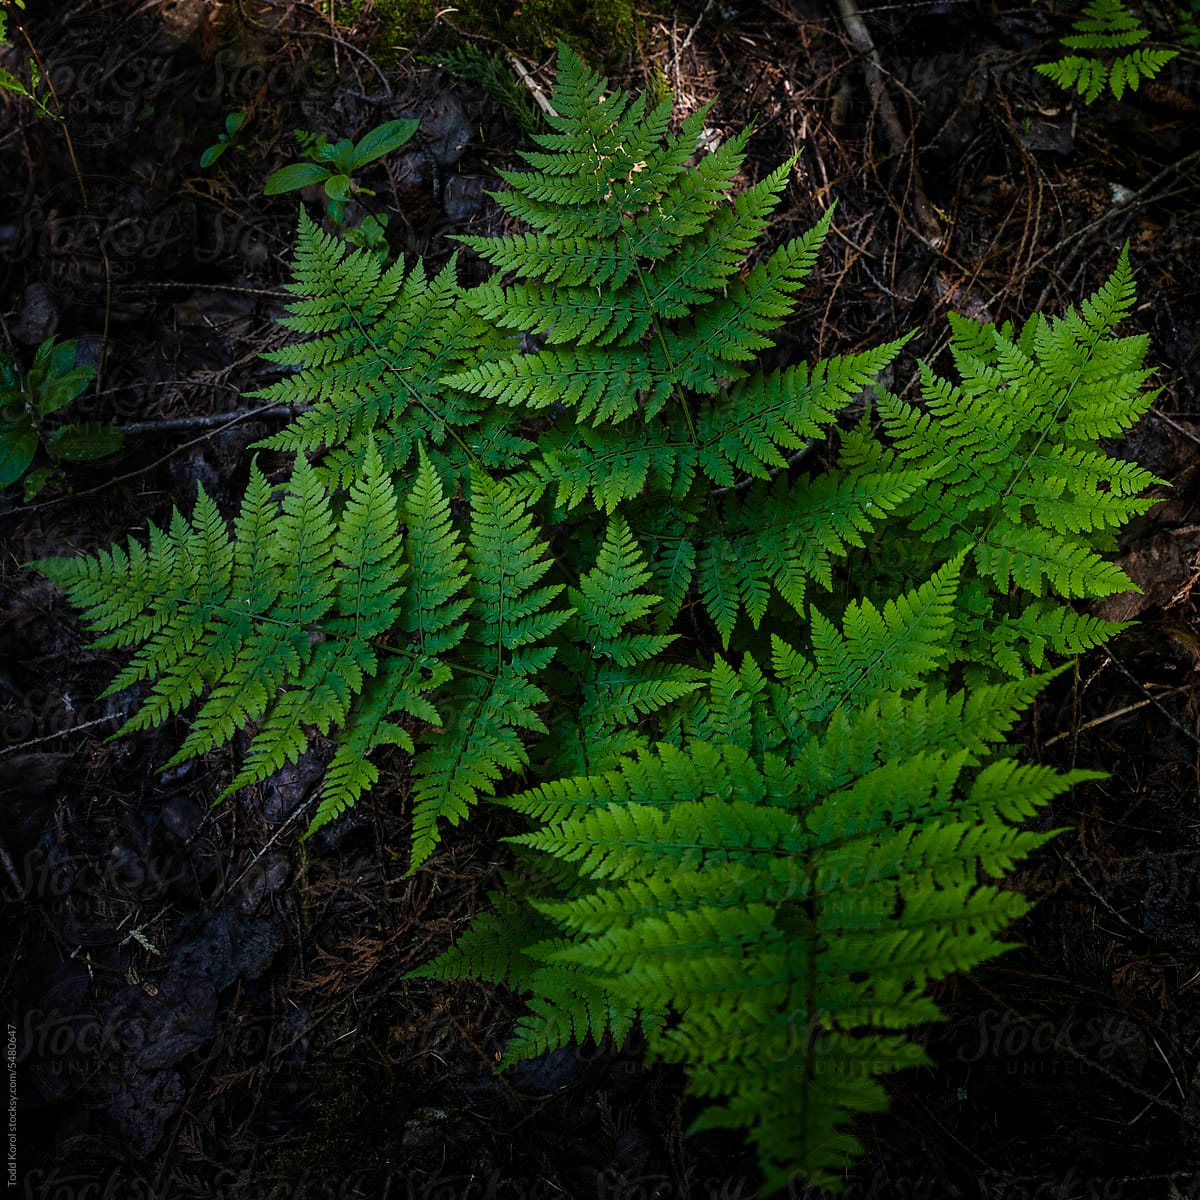 Fern leaves on a forest floor.